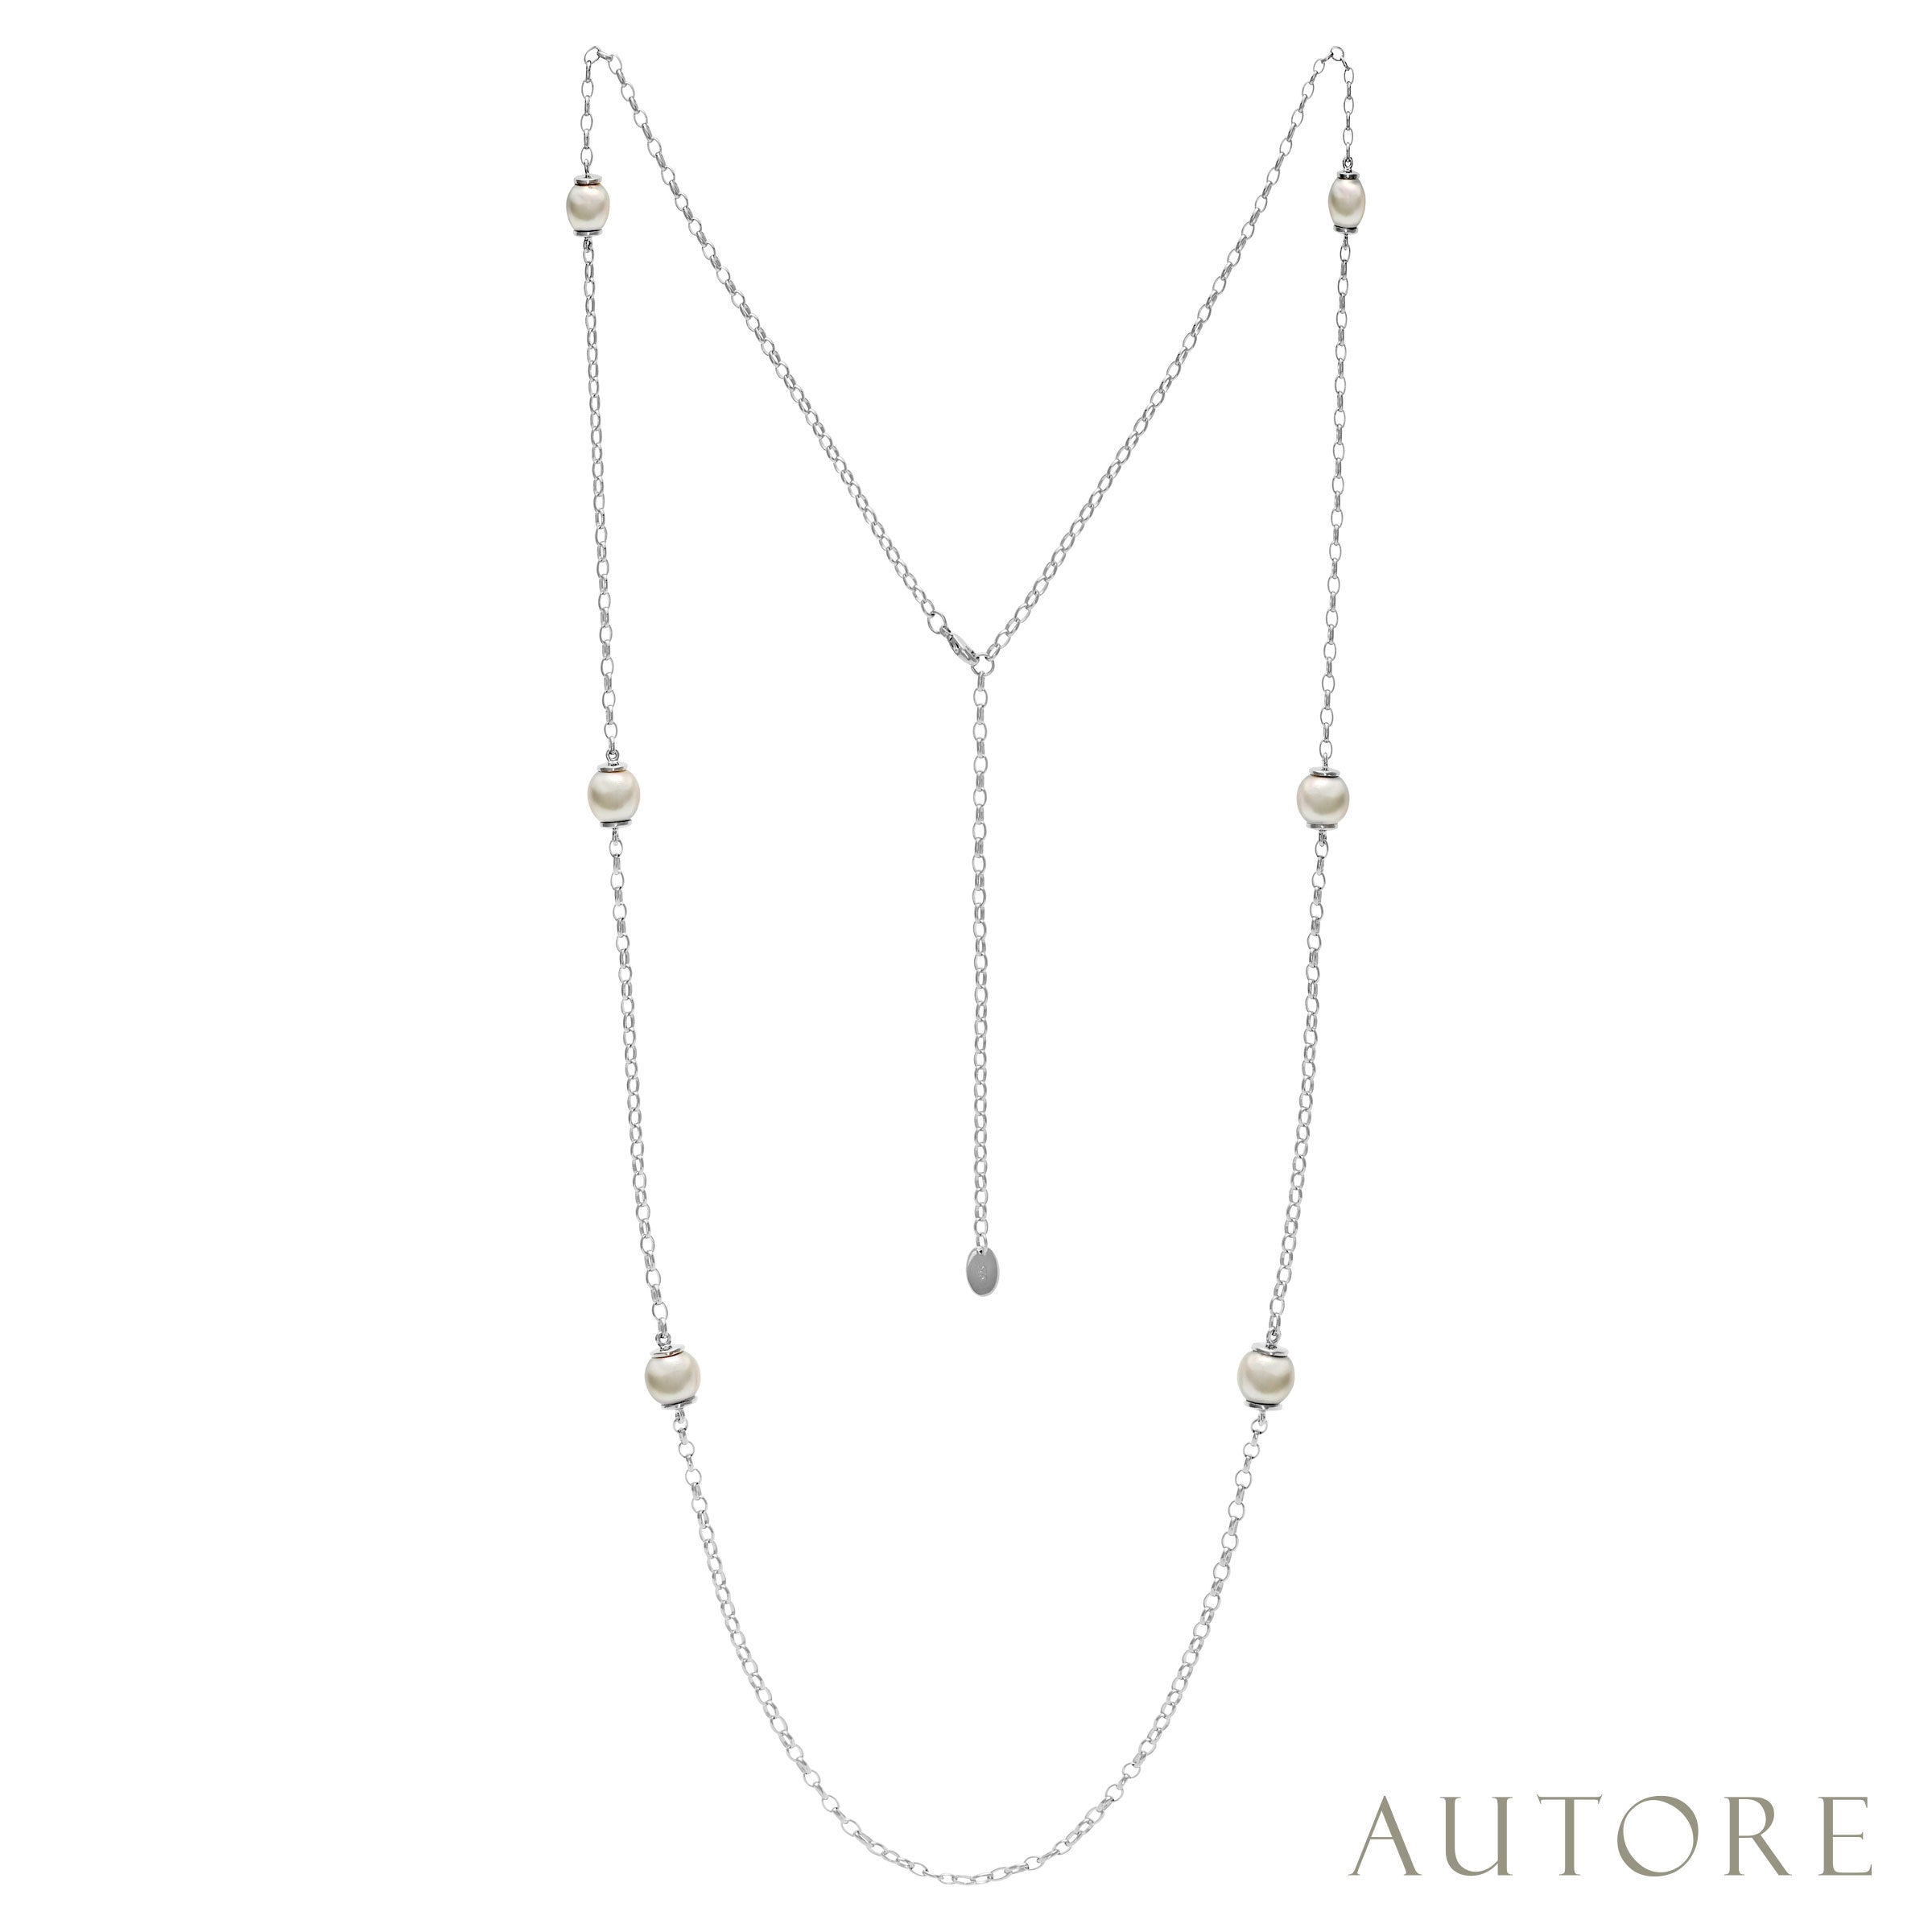 AUTORE Necklace featuring 9mm and 10mm South Sea pearls